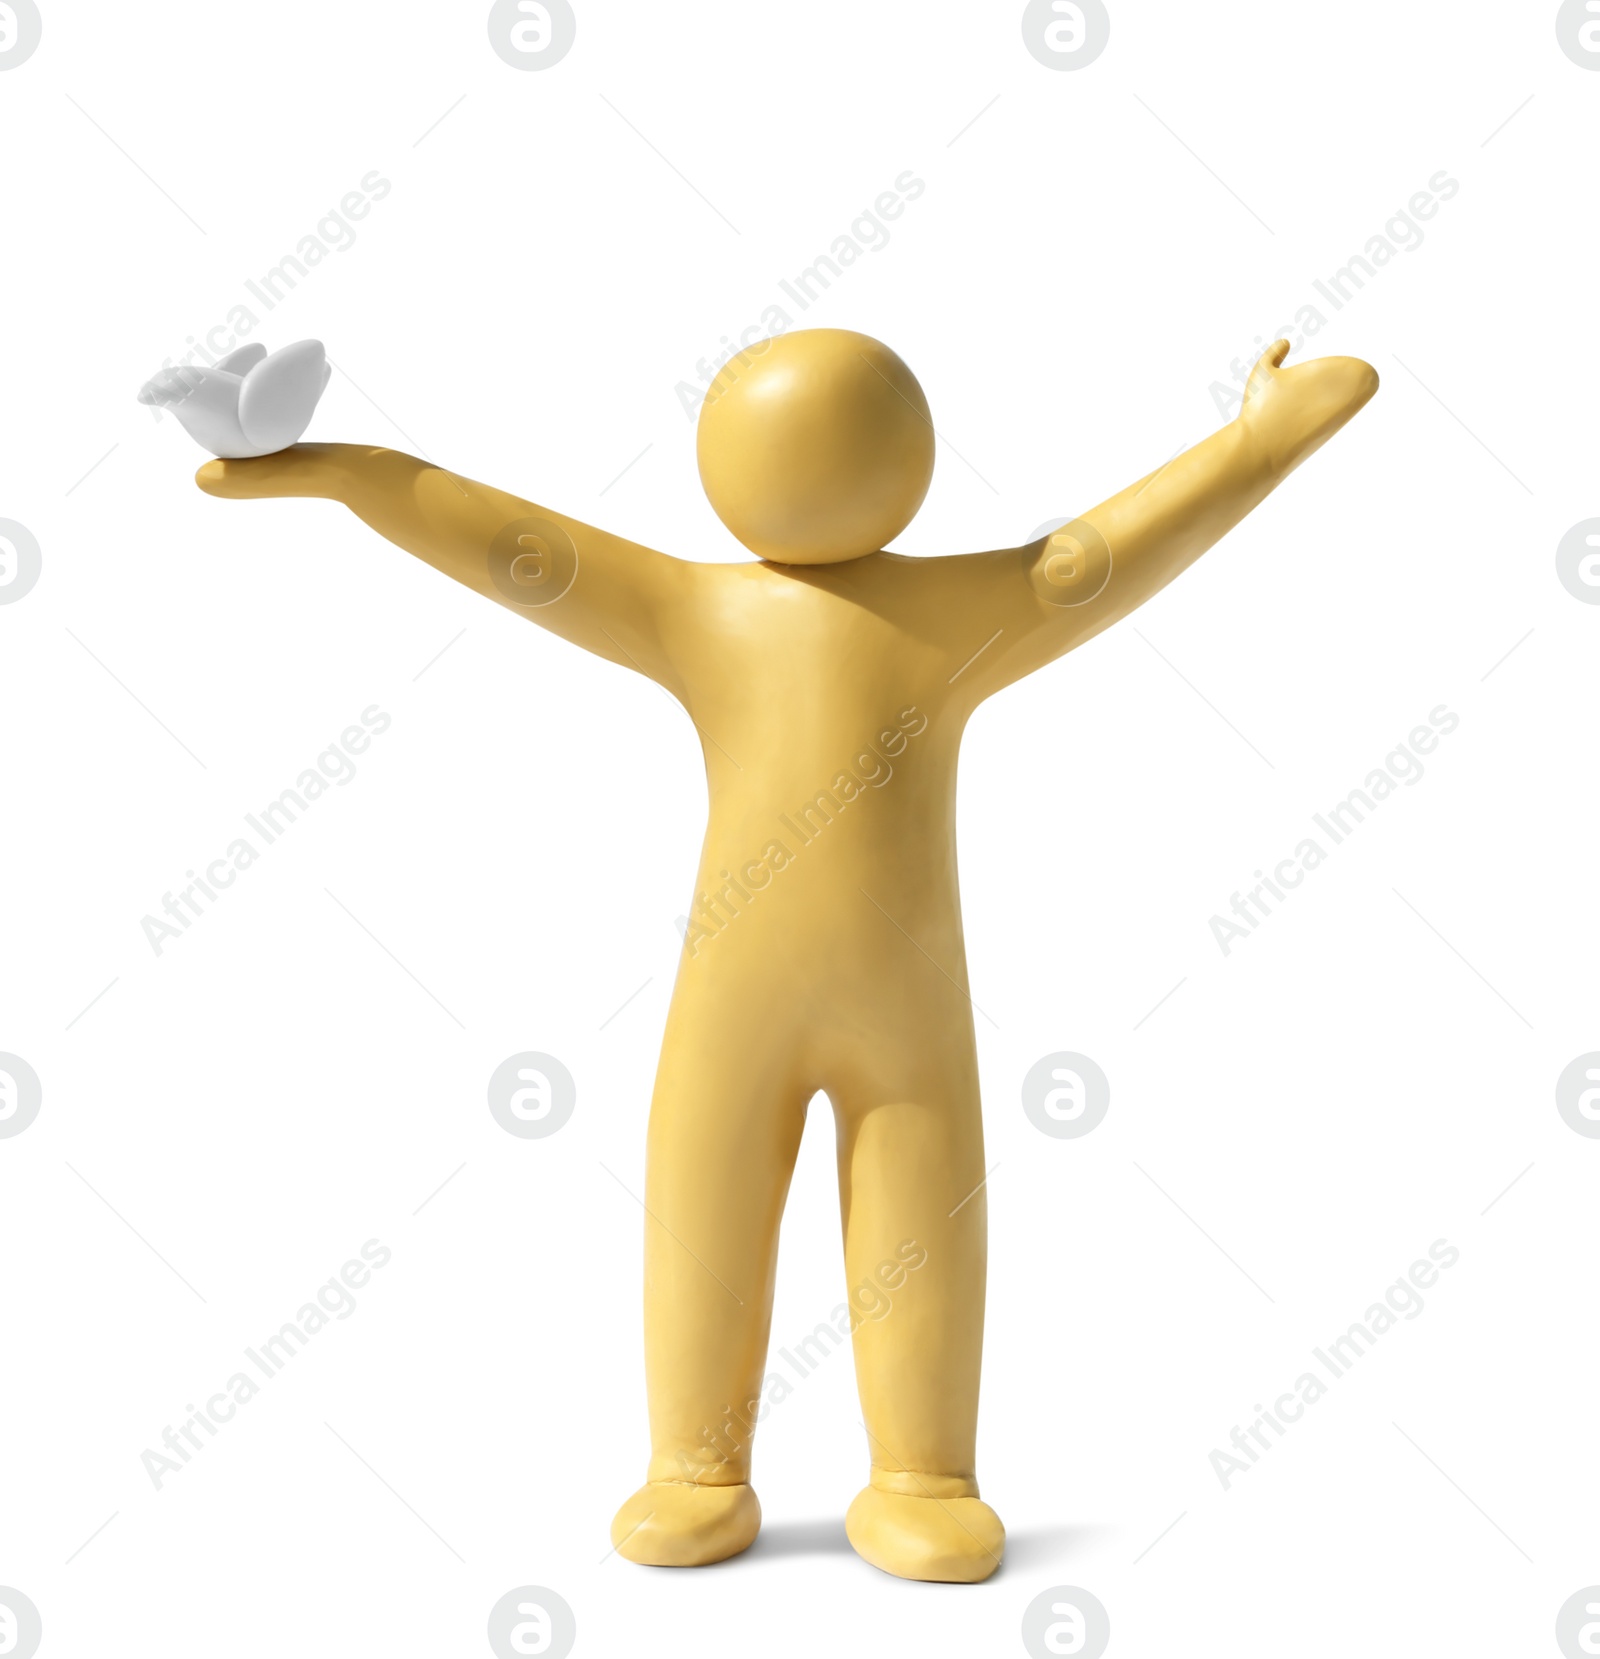 Photo of Human figure with small dove made of plasticine on white background